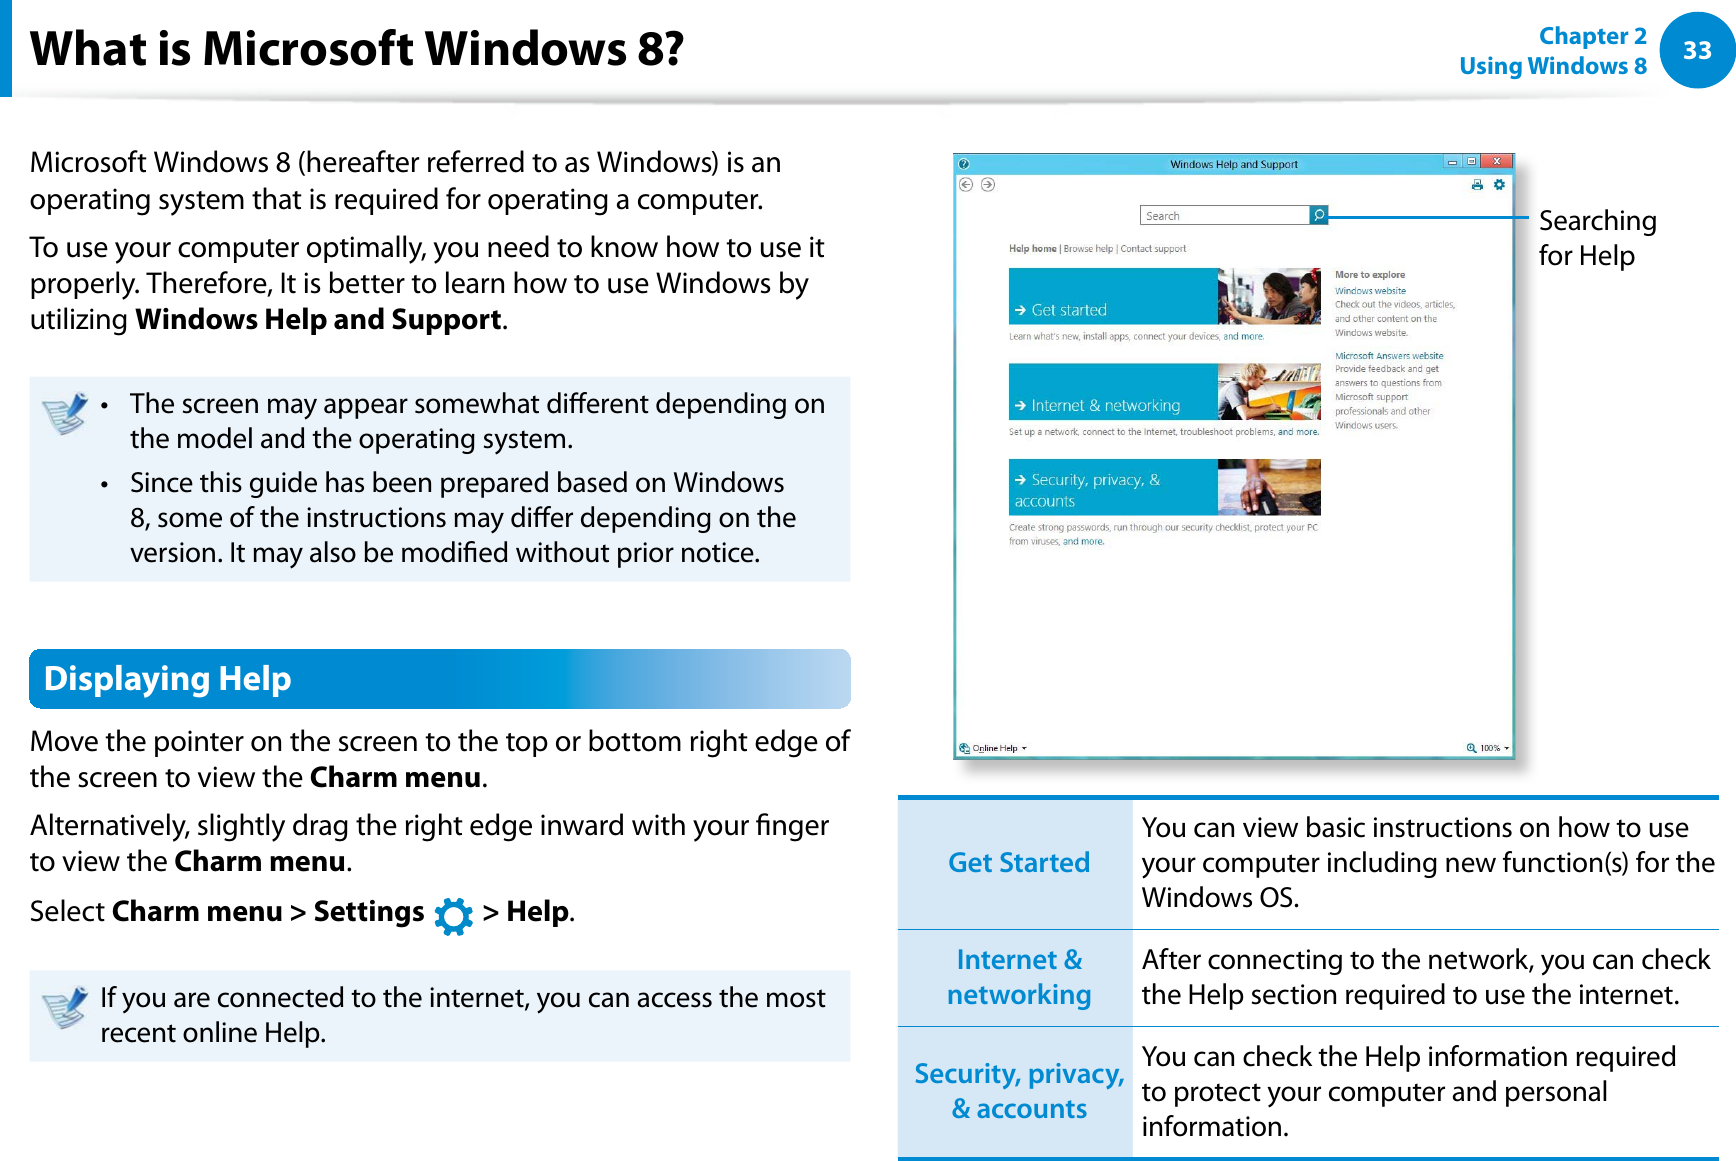 33Chapter 2 Using Windows 8  What is Microsoft Windows 8?Microsoft Windows 8 (hereafter referred to as Windows) is an operating system that is required for operating a computer.To use your computer optimally, you need to know how to use it properly. Therefore, It is better to learn how to use Windows by utilizing Windows Help and Support.The screen may appear somewhat dierent depending on t the model and the operating system.Since this guide has been prepared based on Windows t 8, some of the instructions may dier depending on the version. It may also be modied without prior notice.Displaying HelpMove the pointer on the screen to the top or bottom right edge of the screen to view the Charm menu.Alternatively, slightly drag the right edge inward with your nger to view the Charm menu.Select Charm menu &gt; Settings   &gt; Help.If you are connected to the internet, you can access the most recent online Help.Searching for Help Get StartedYou can view basic instructions on how to use your computer including new function(s) for the Windows OS.Internet &amp; networkingAfter connecting to the network, you can check the Help section required to use the internet.Security, privacy, &amp; accountsYou can check the Help information required to protect your computer and personal information.